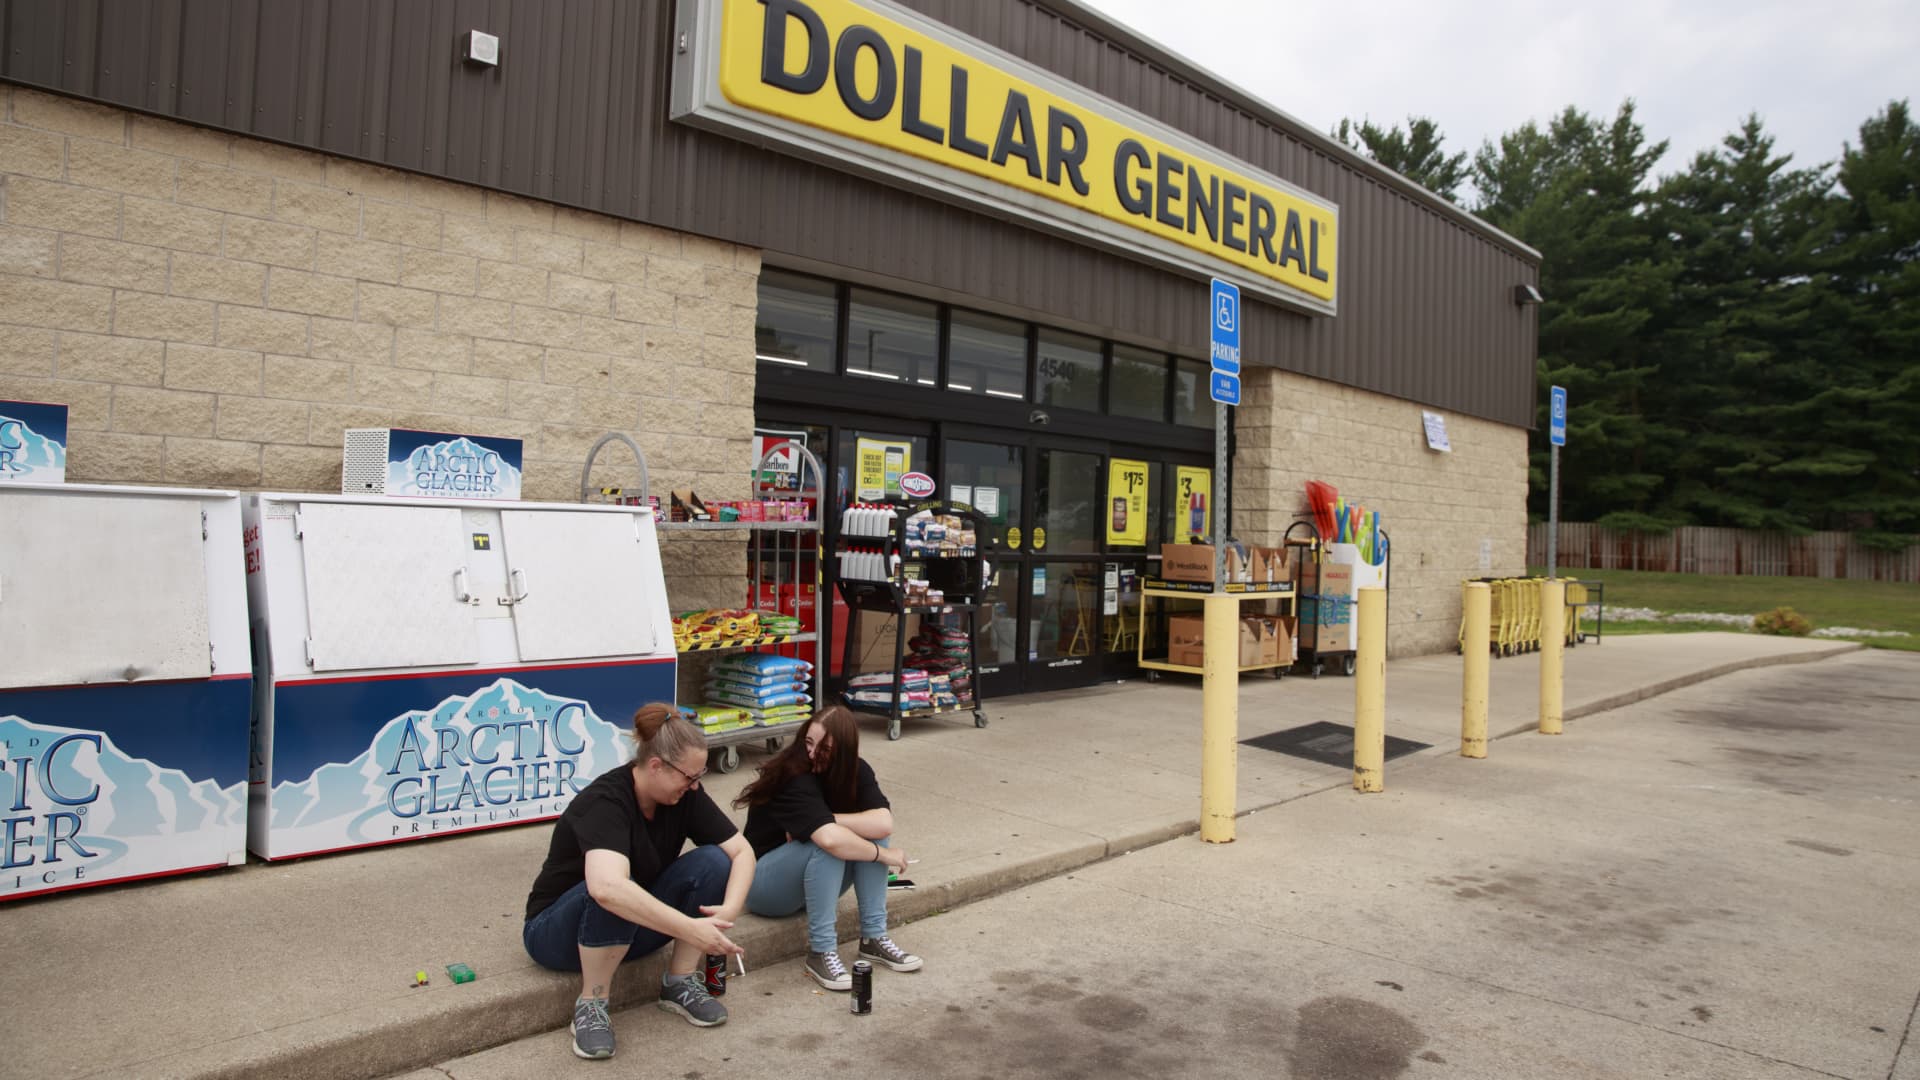 Workers at the Dollar General store.